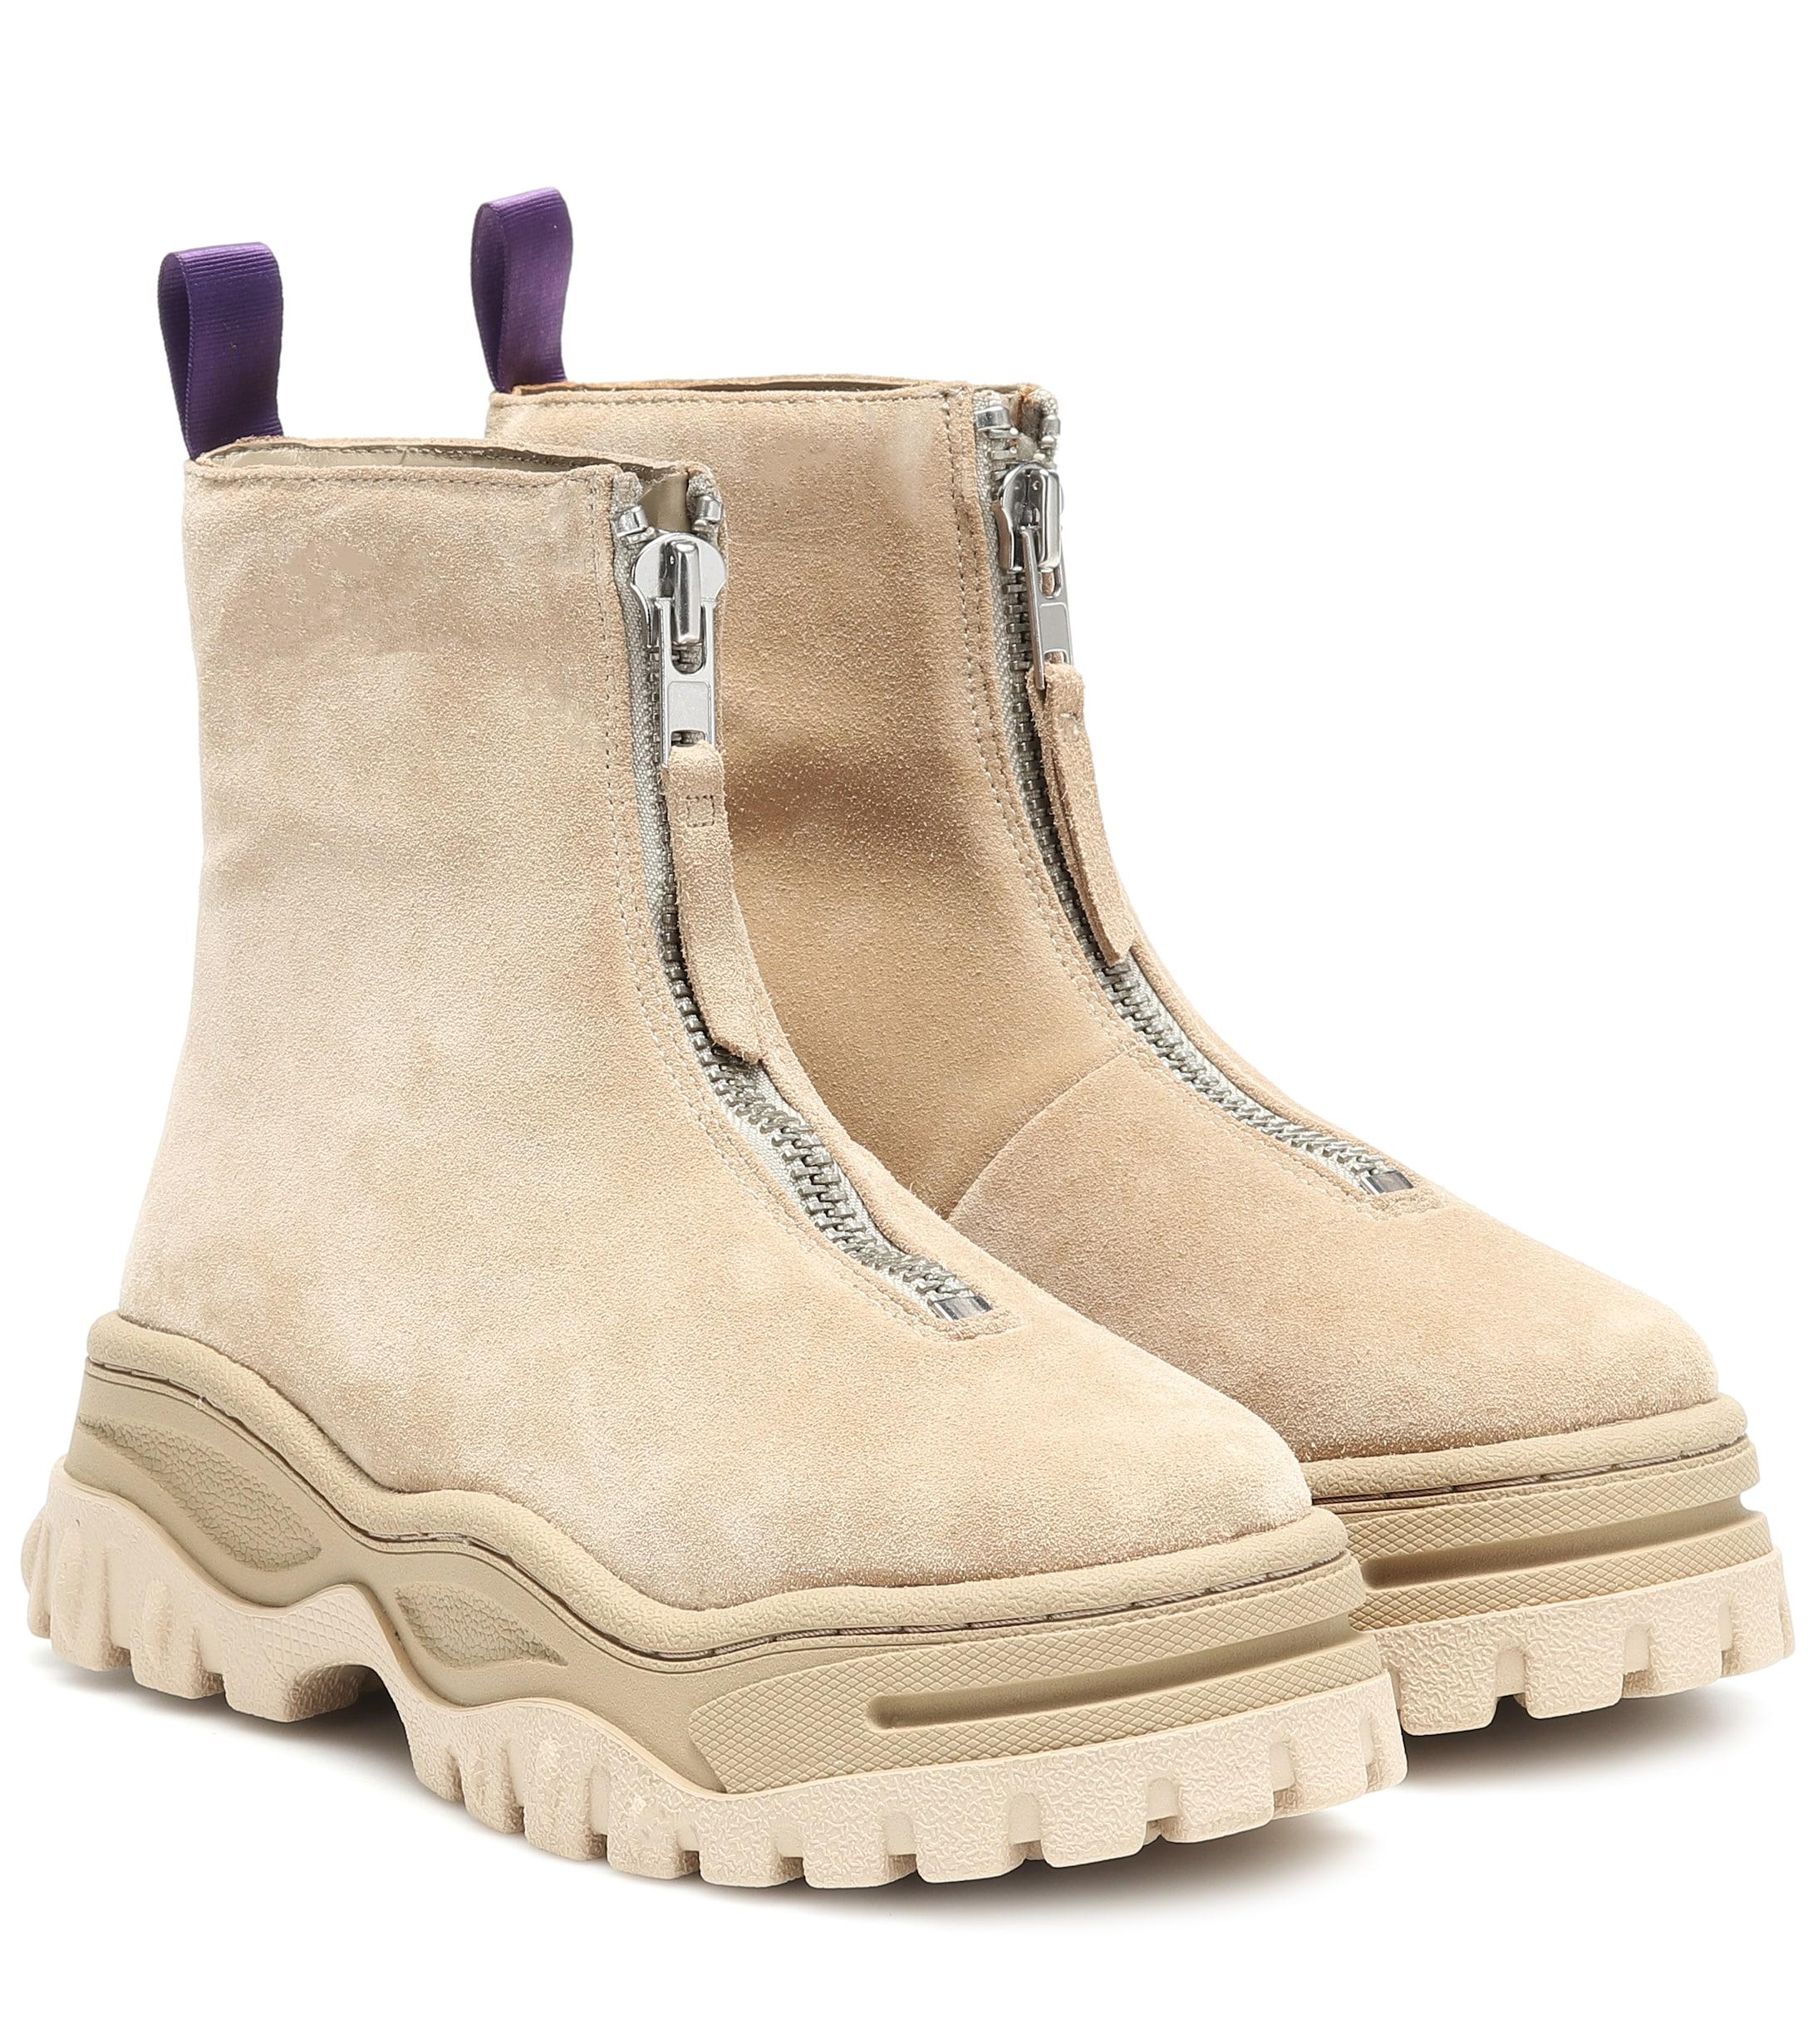 Eytys Raven Suede Ankle Boots in Beige (Natural) - Save 39% - Lyst